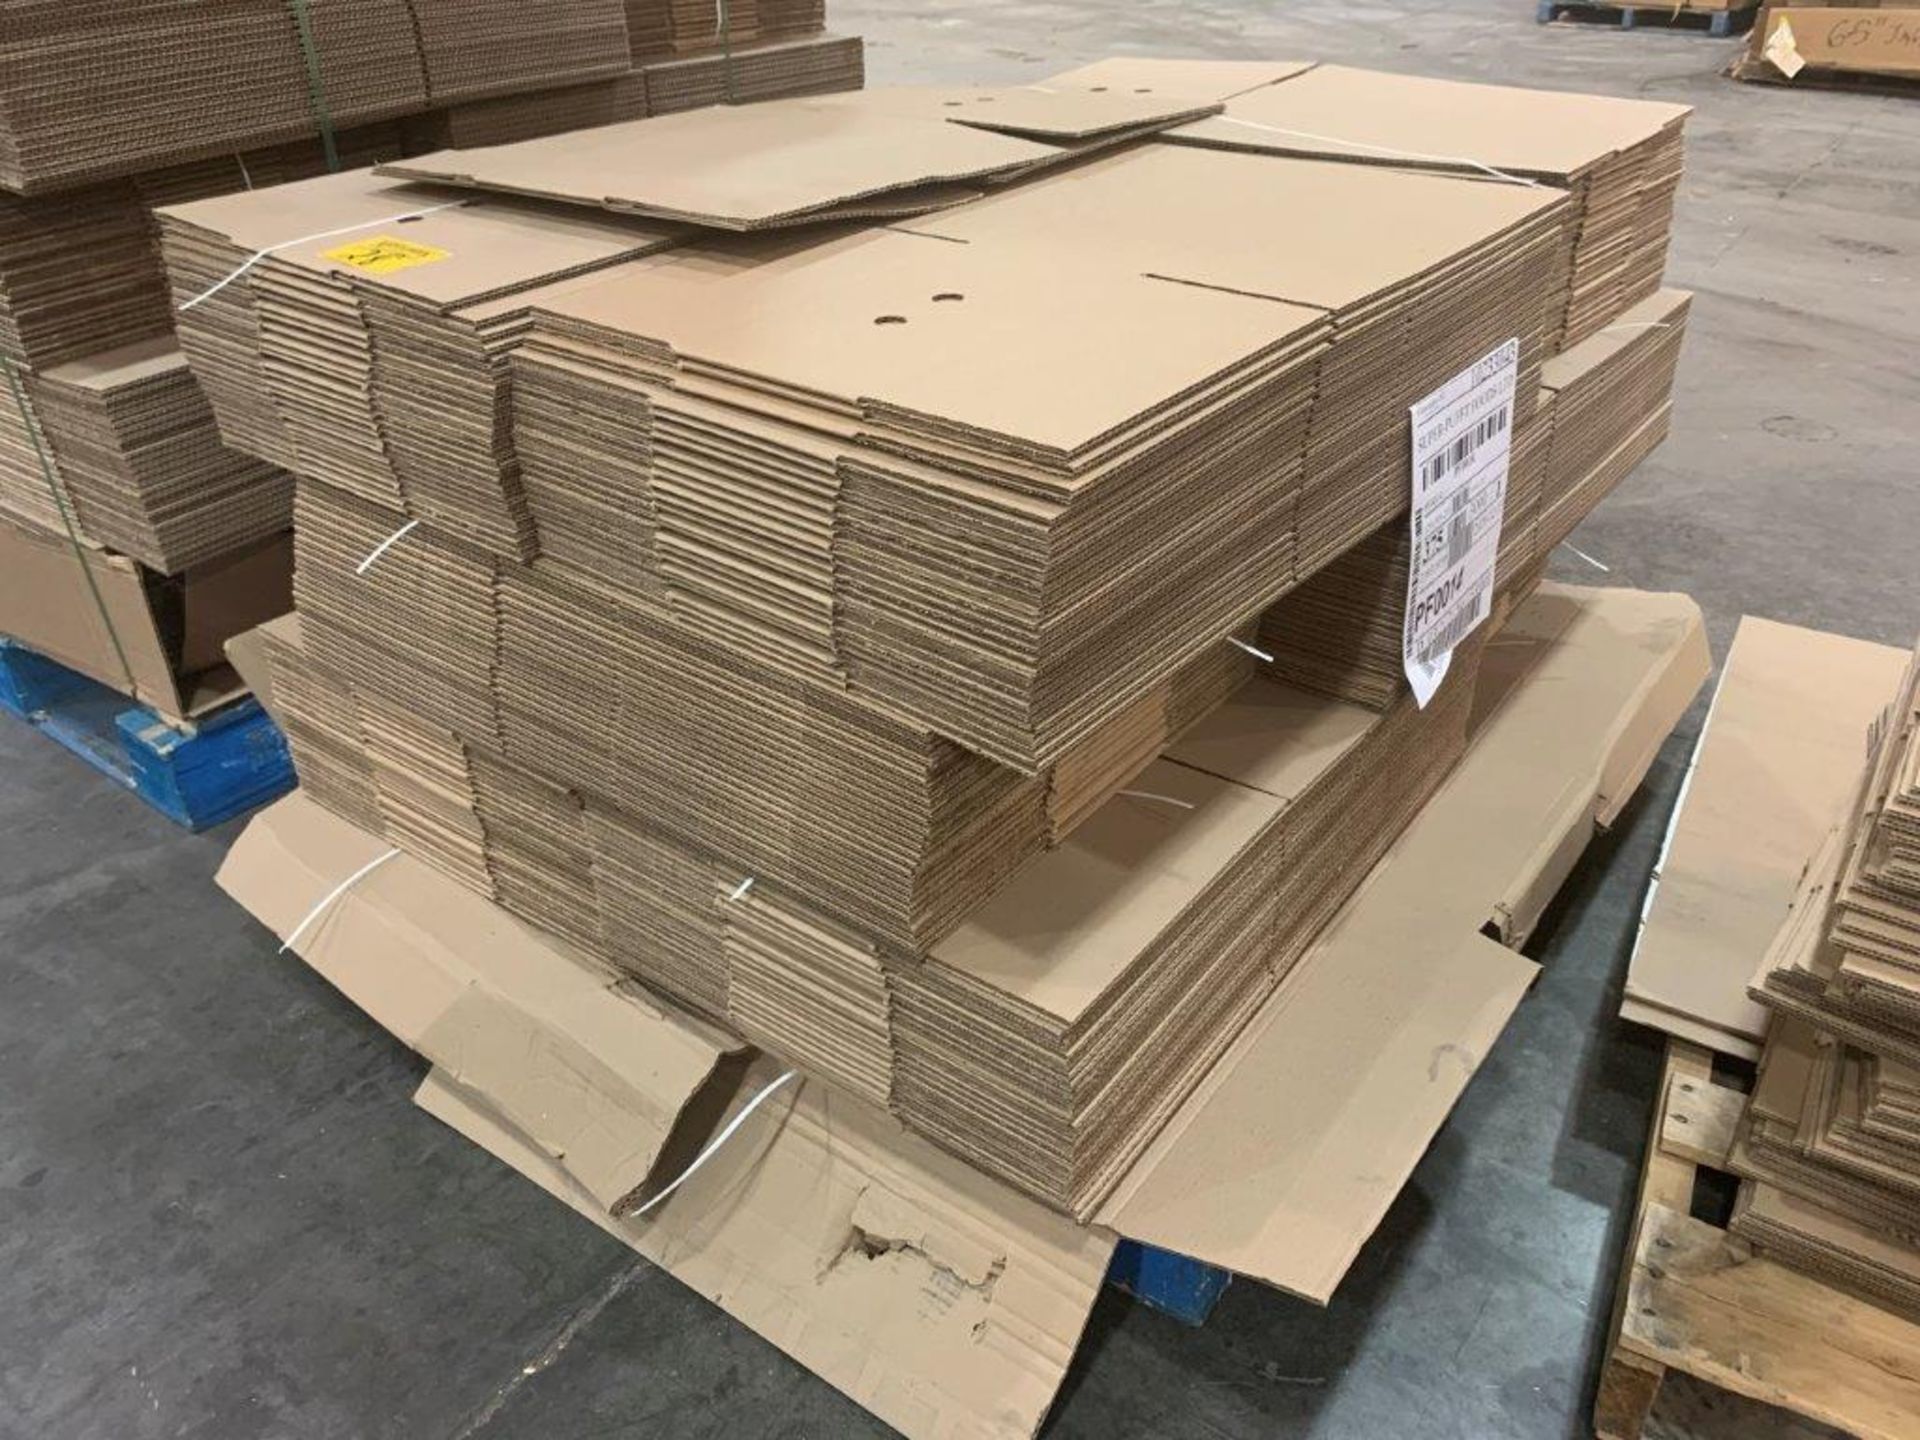 1-PT PALLET PF0014 CORRIGATED CARDBOARD BOXES APPROX. 225 BOXES APPROX 18X13X7 INCHES